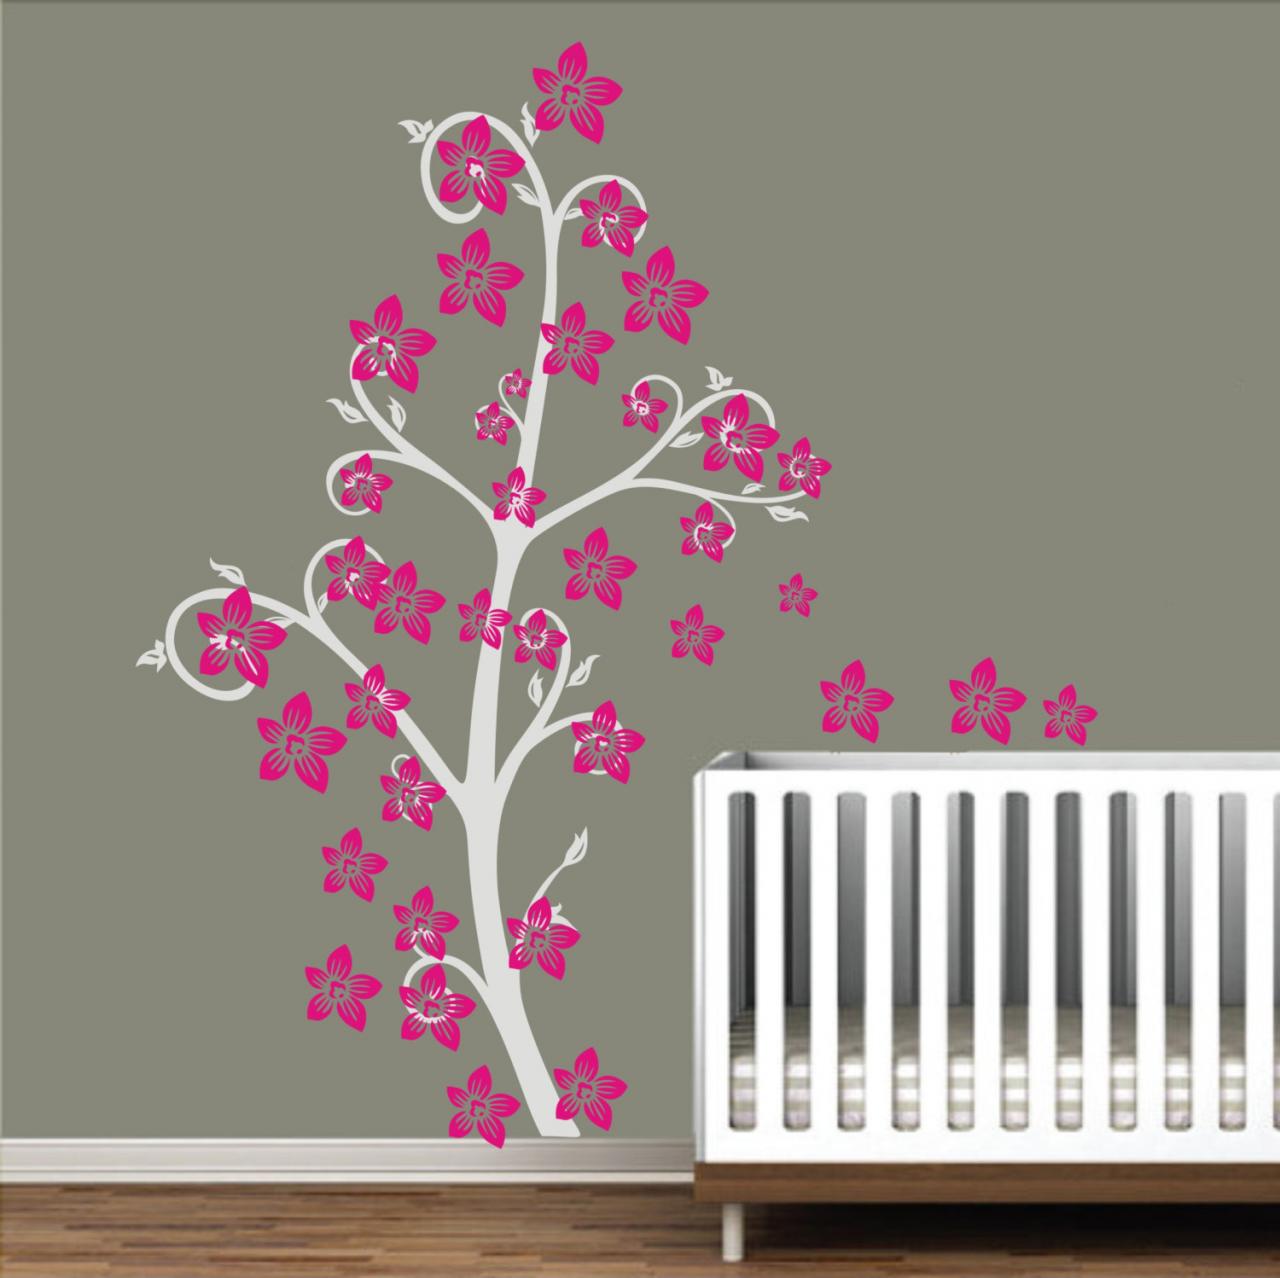 Vinyl Wall Decal Romantic Simple Heart Love Flower Tree Floral Flowers Home House Art Wall Decals Wall Sticker Stickers Baby Room Kid R610